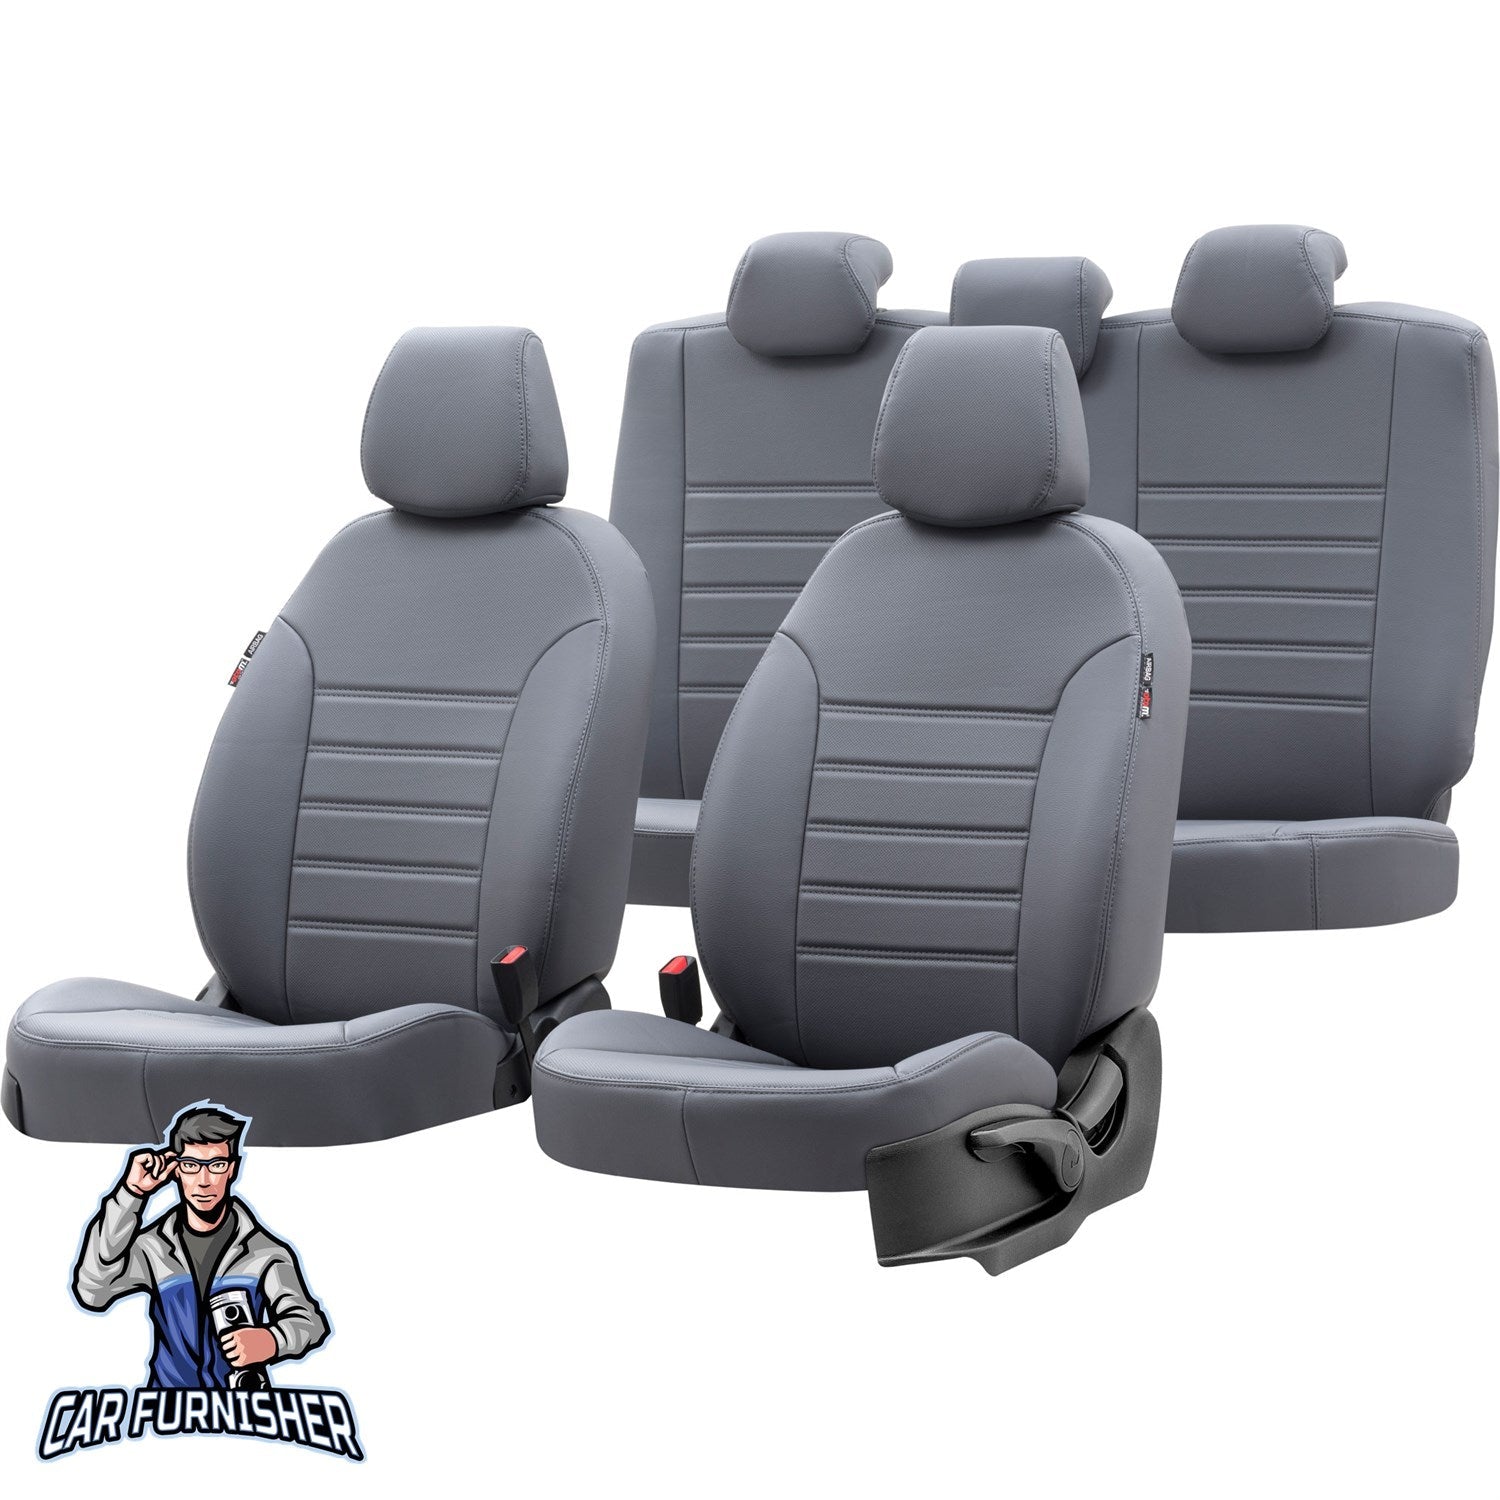 Audi A1 Car Seat Cover 2011-2016 Custom Made Istanbul Design Smoked Full Set (5 Seats + Handrest) Leather & Fabric